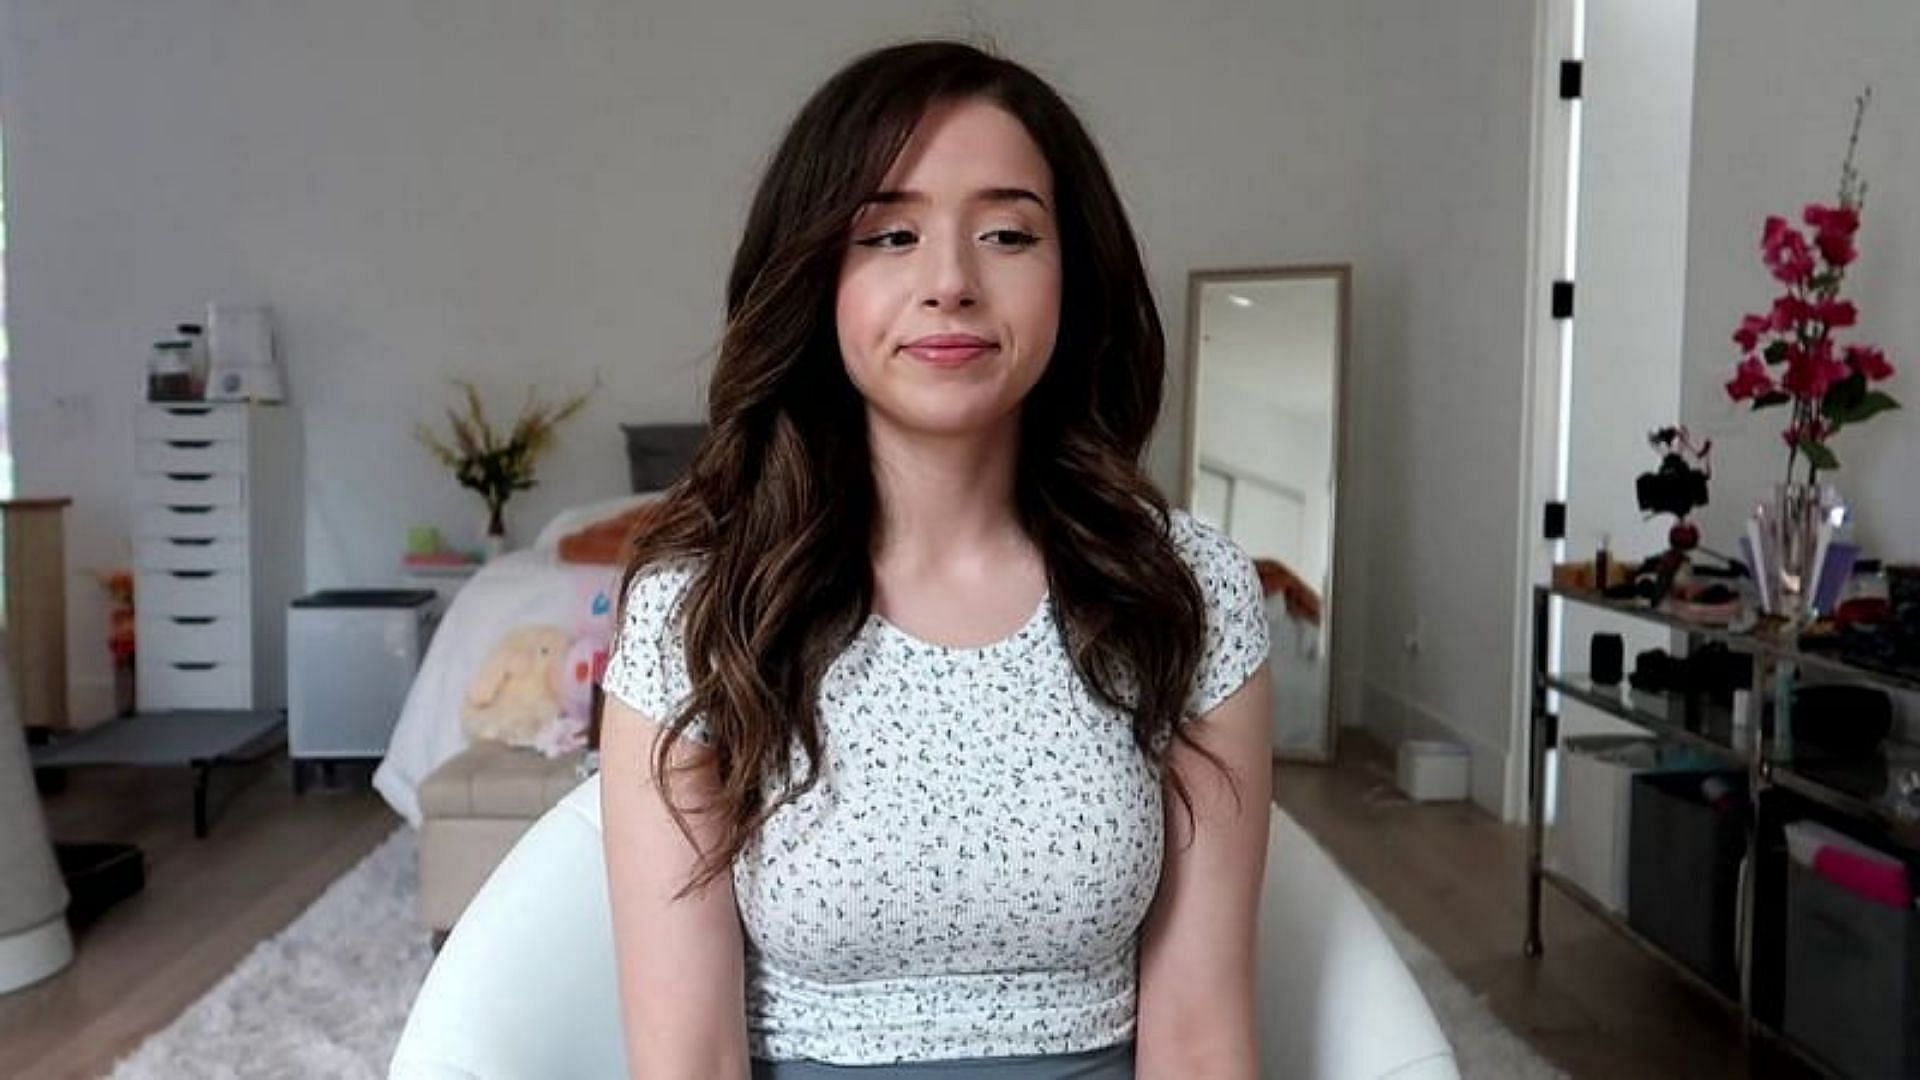 Pokimane regularly makes note-worthy quotes that her viewers can learn from (Image via Pokimane)